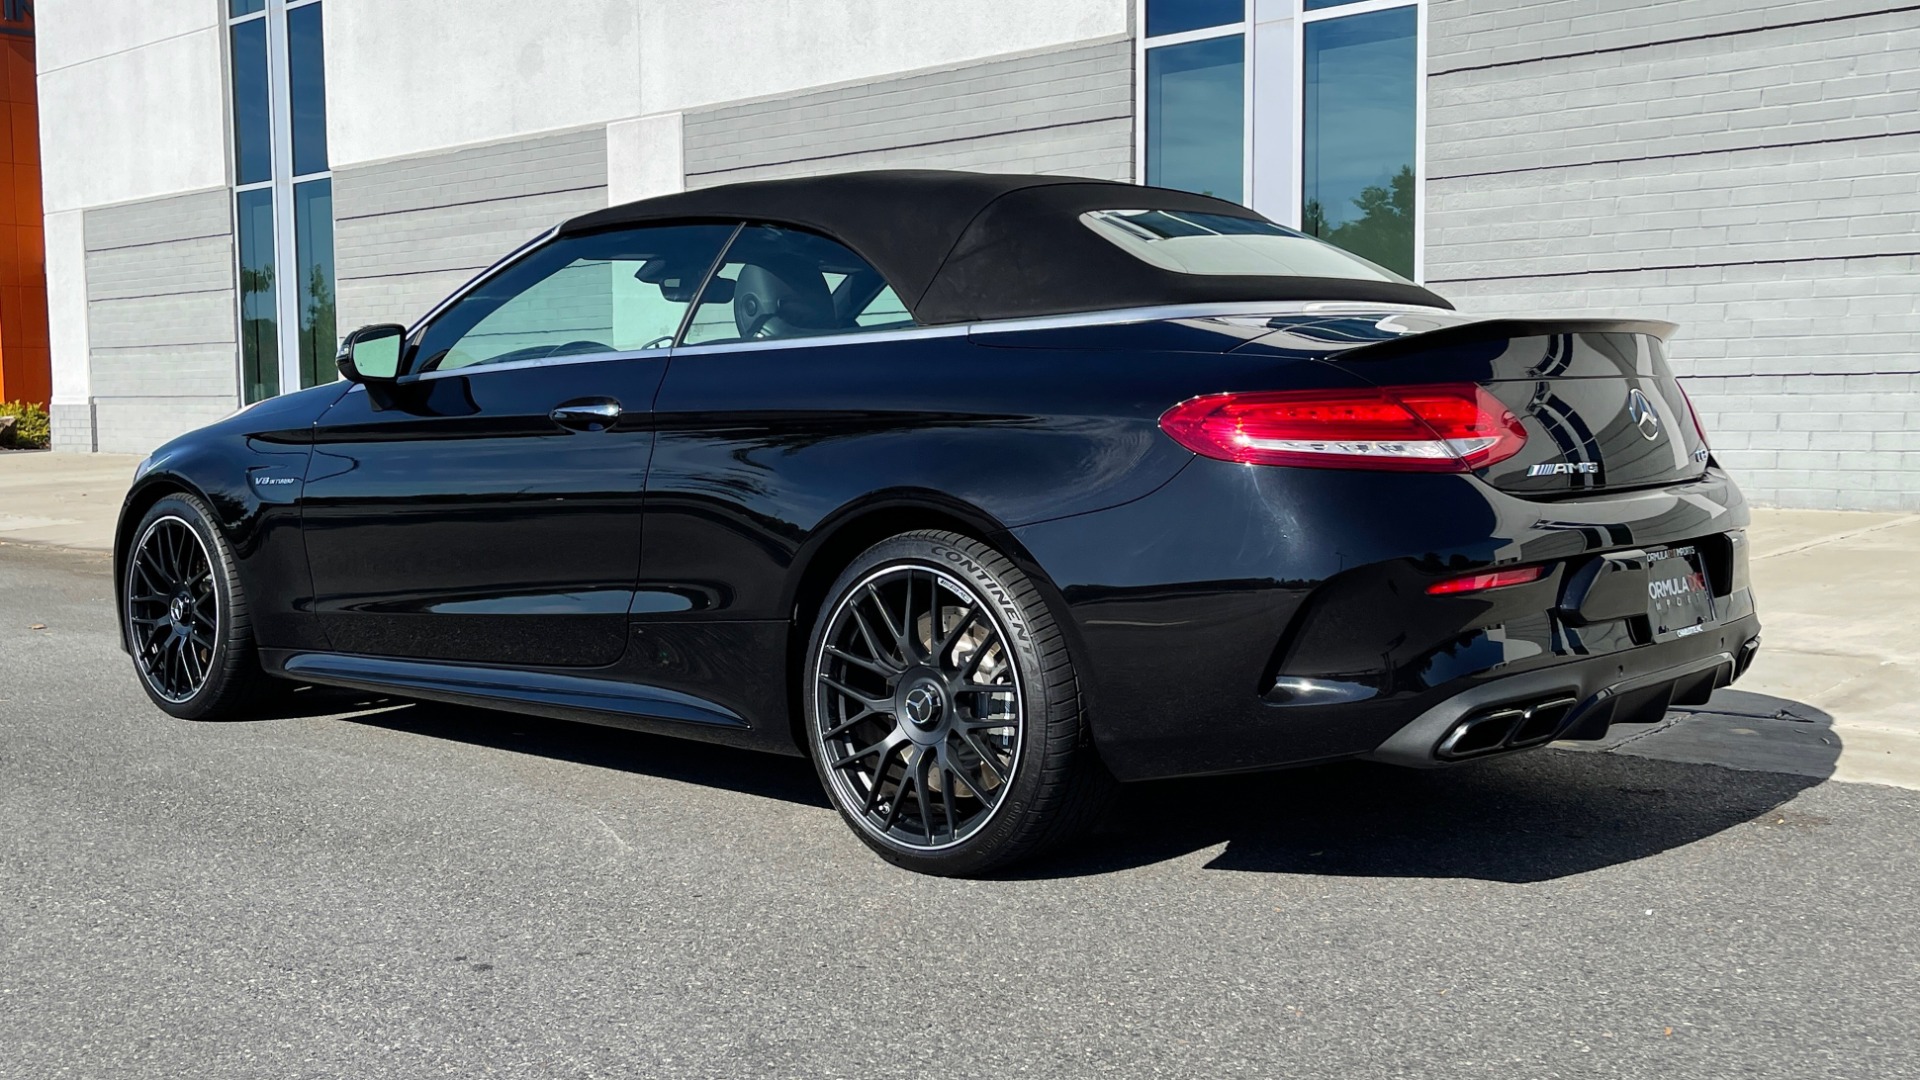 Used 2018 Mercedes-Benz C-CLASS AMG C 63 CAB / PREMIUM / LIGHTING / NIGHT PKG / PERF EXHAUST for sale $67,495 at Formula Imports in Charlotte NC 28227 6